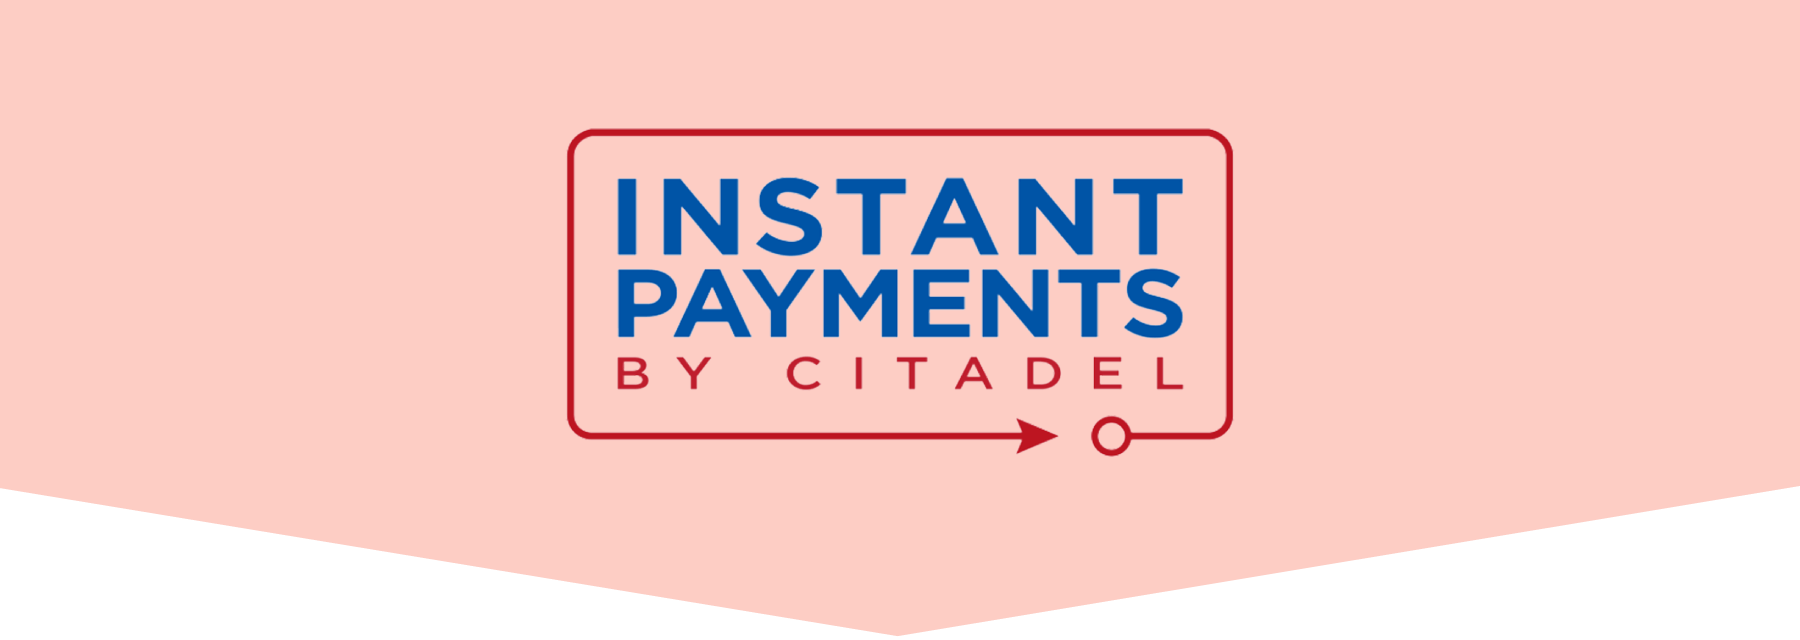 Instant-Banking-by-Citadel-online-canada-casino-payment